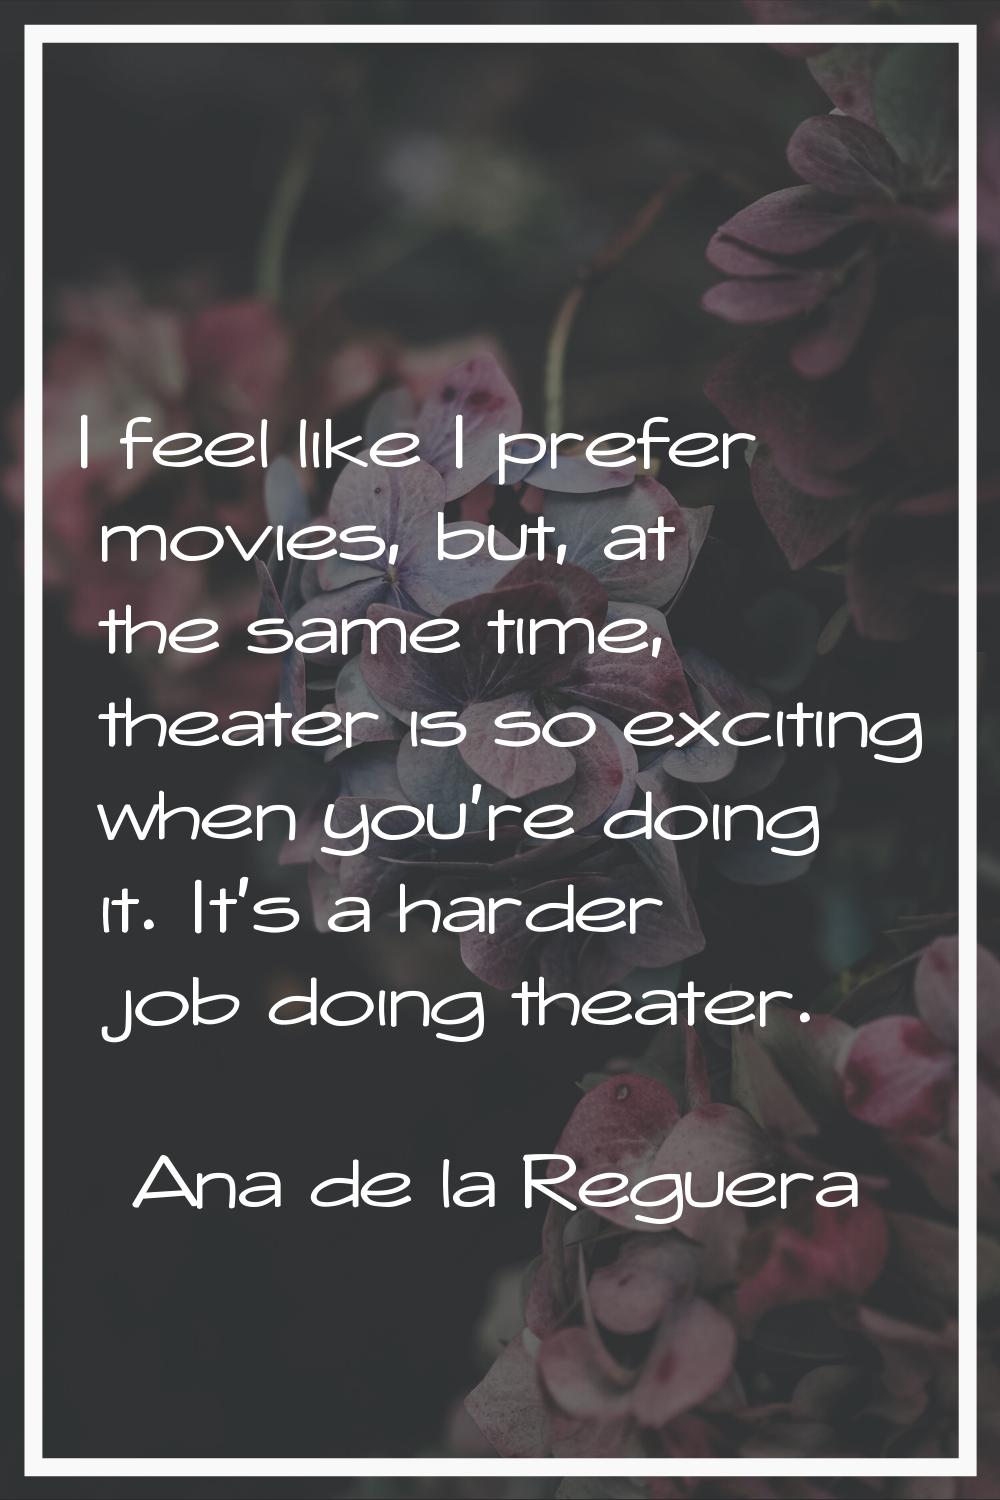 I feel like I prefer movies, but, at the same time, theater is so exciting when you're doing it. It